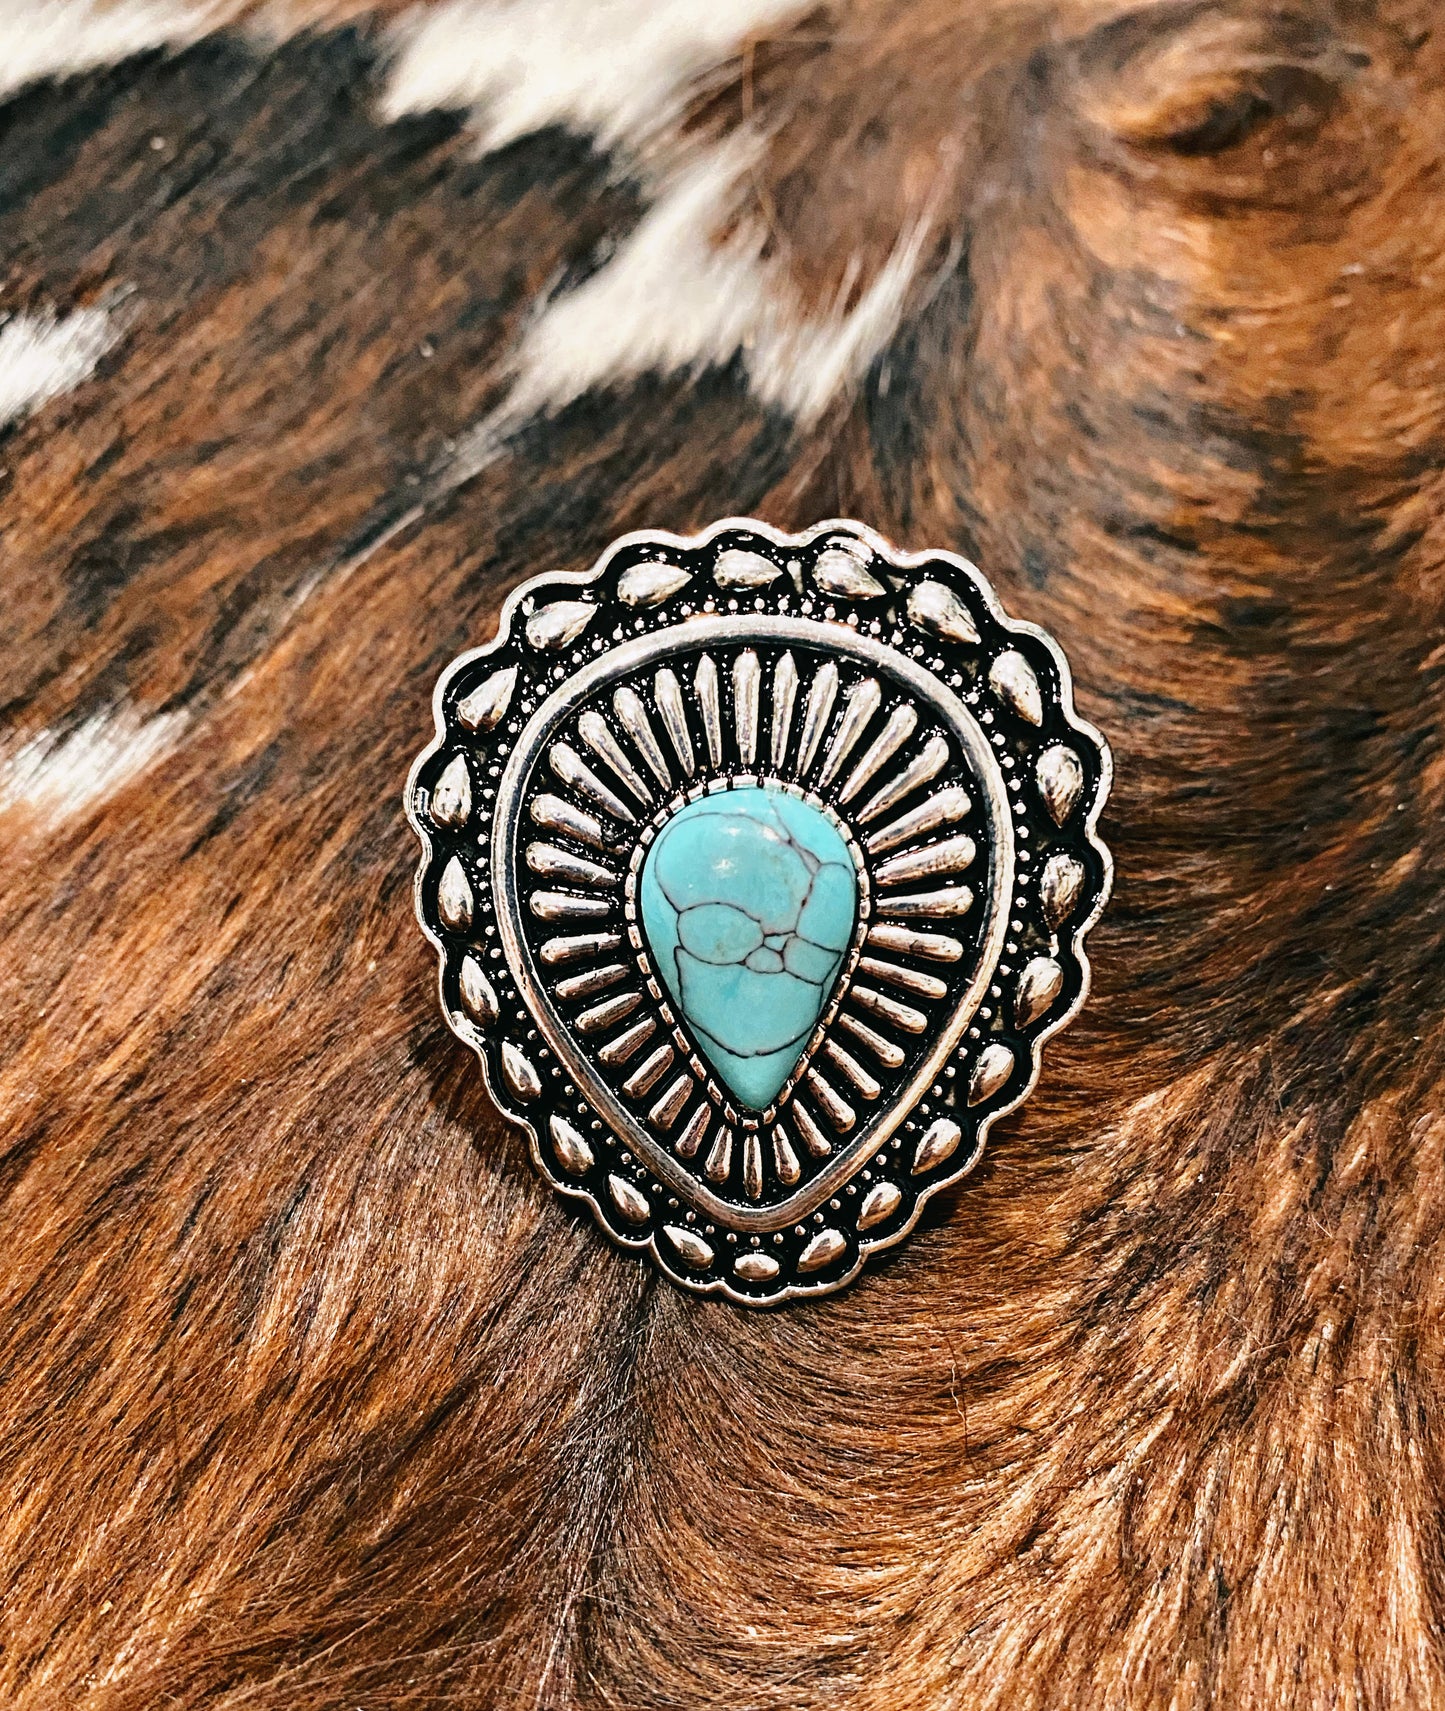 Silvertone and turquoise stone teardrop ring